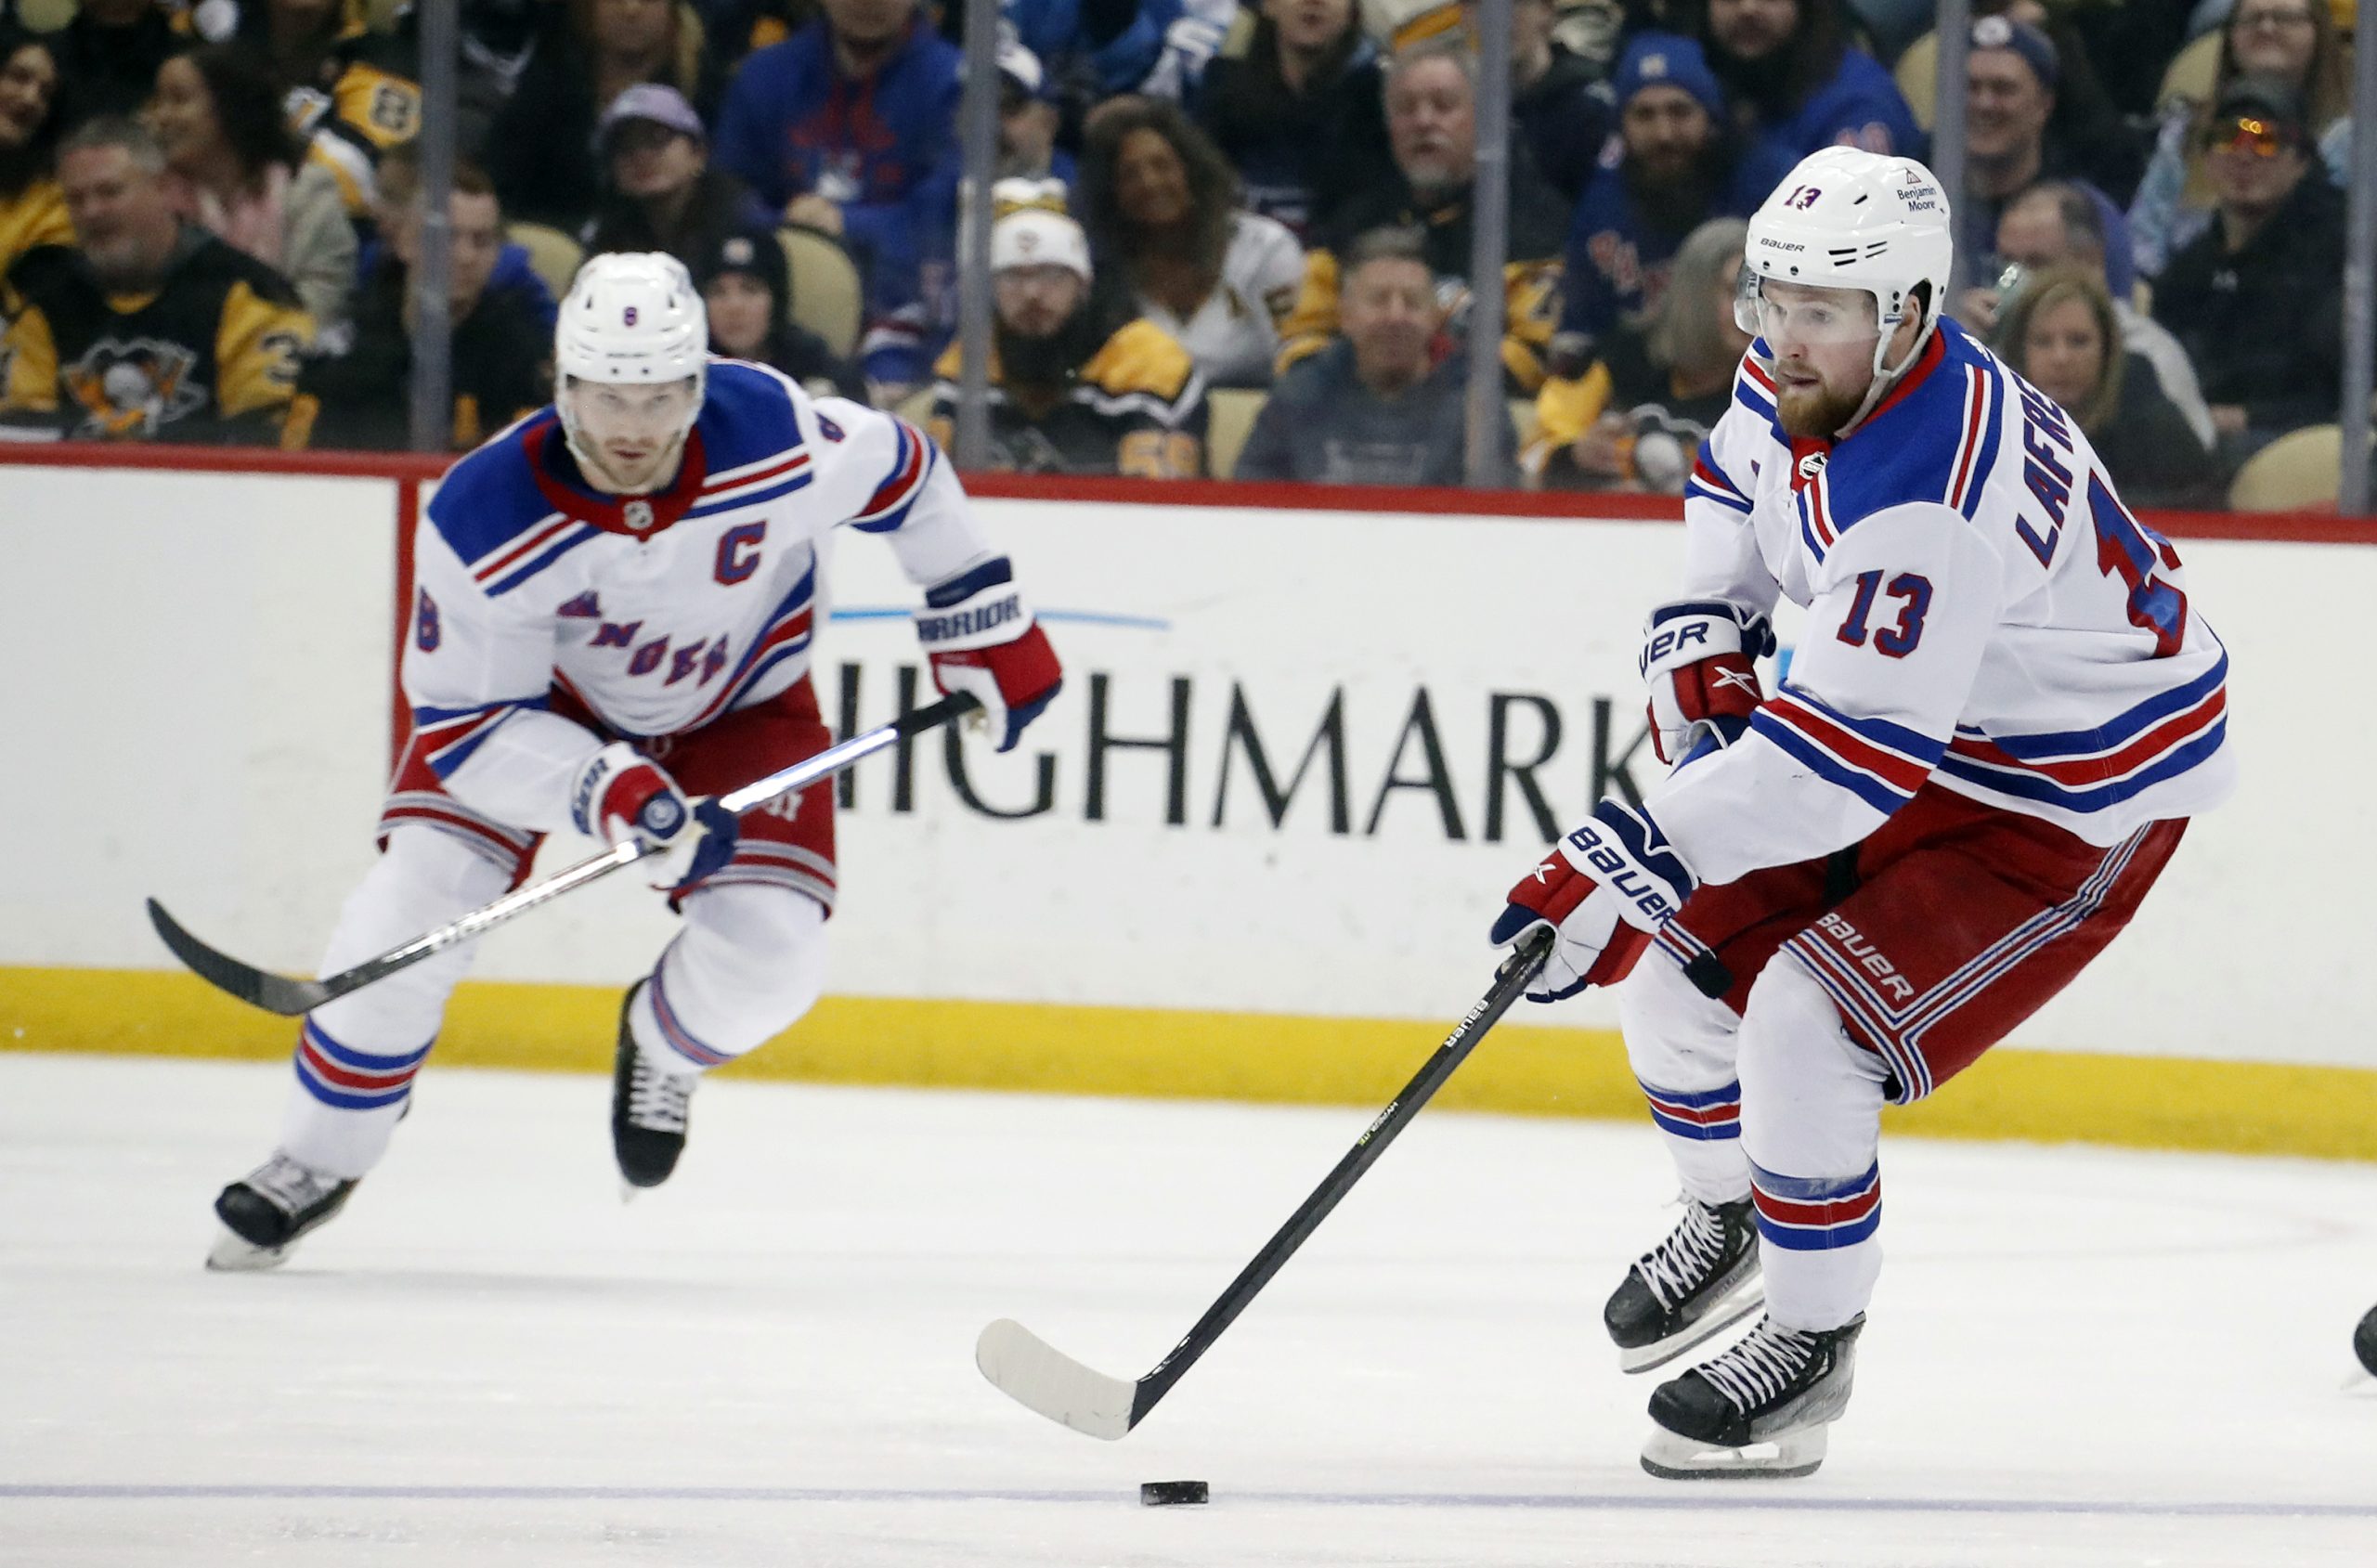 Lafreniere scores in OT to lift Rangers over Flames 5-4